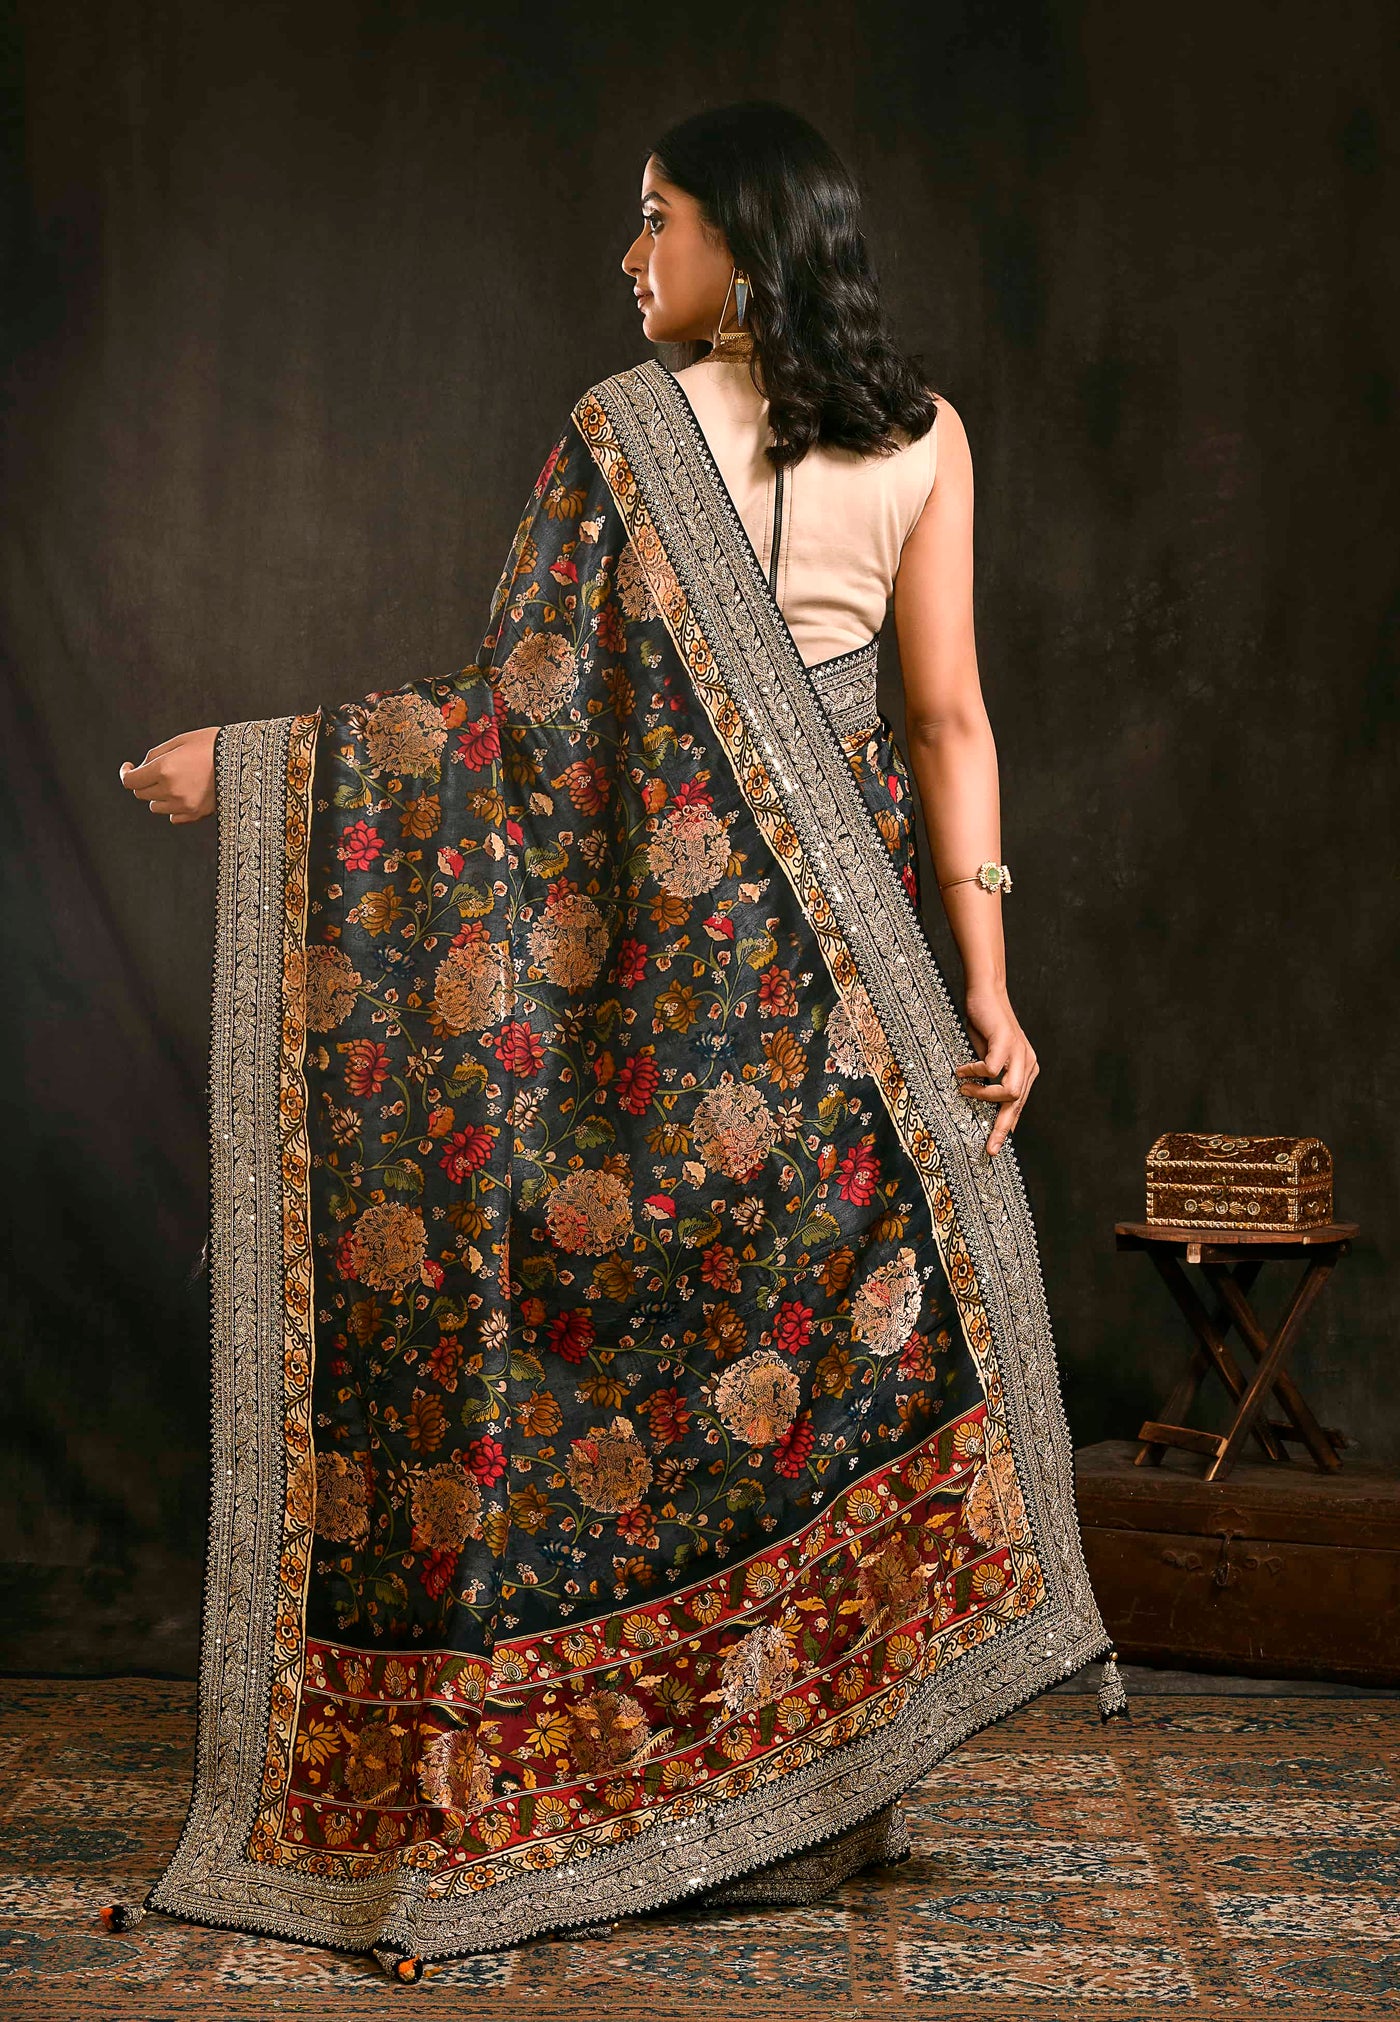 Black Party Wear Saree With Floral Embroidery